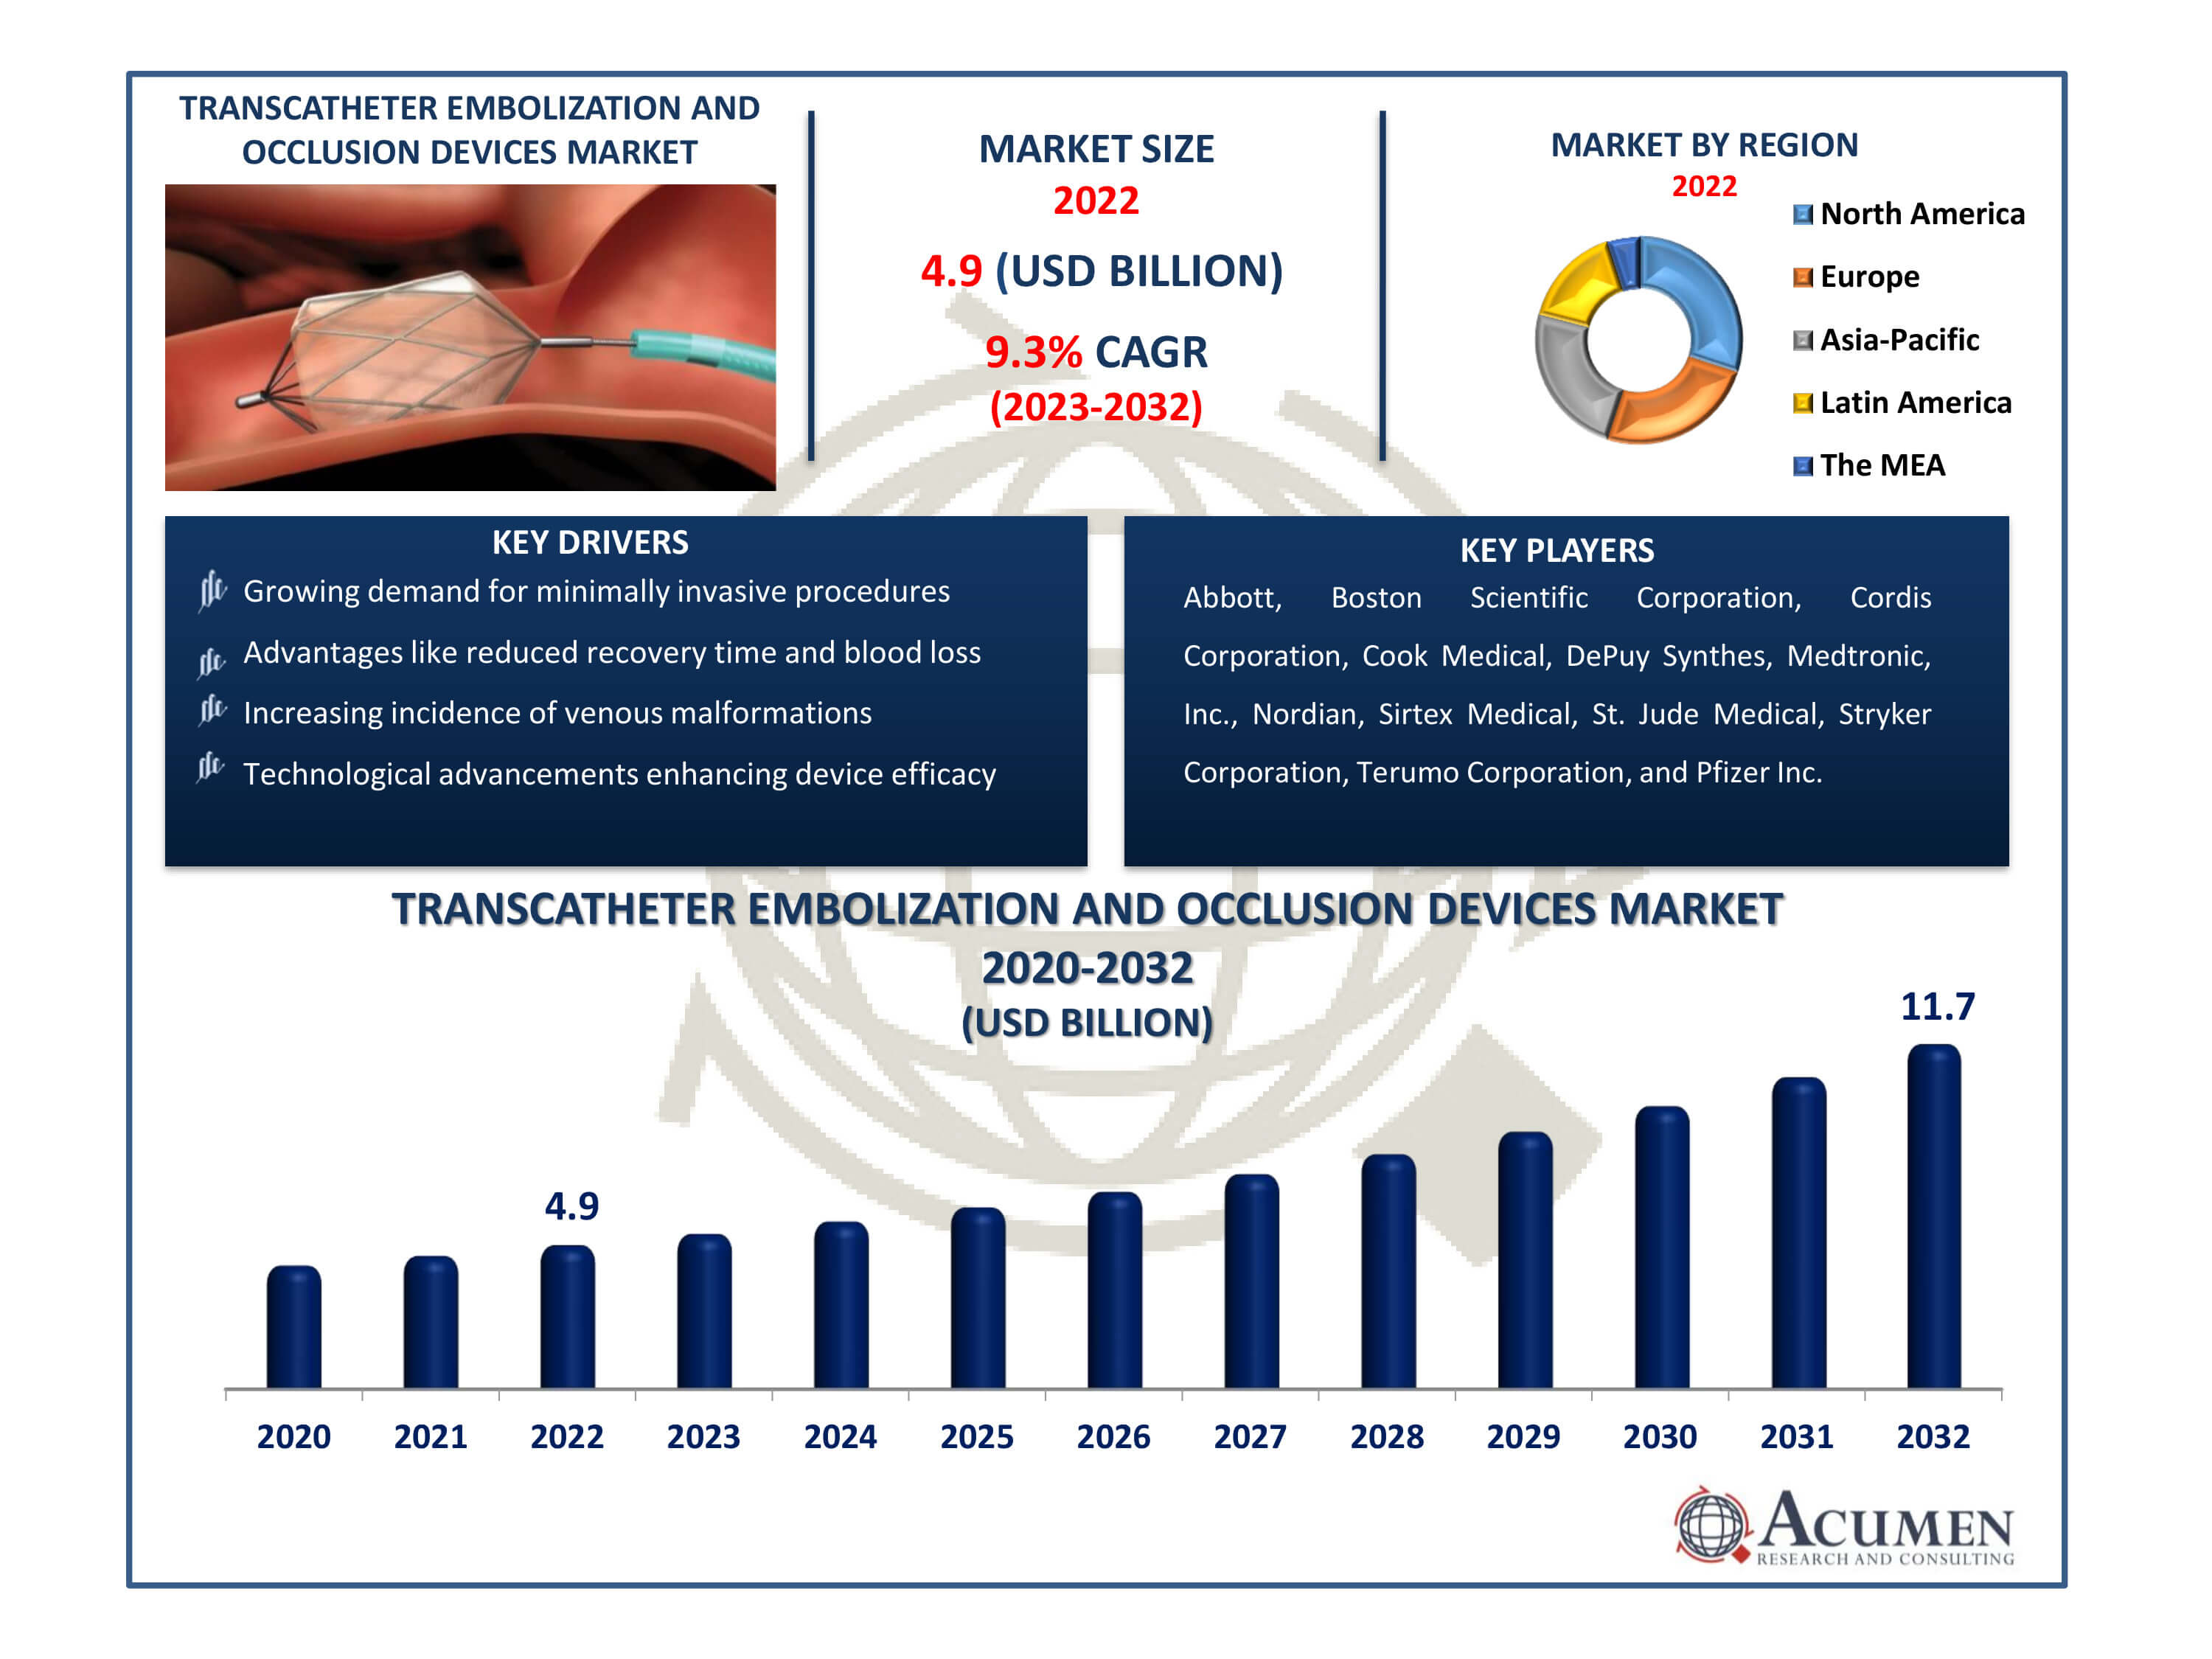 Transcatheter Embolization and Occlusion Devices Market Dynamics